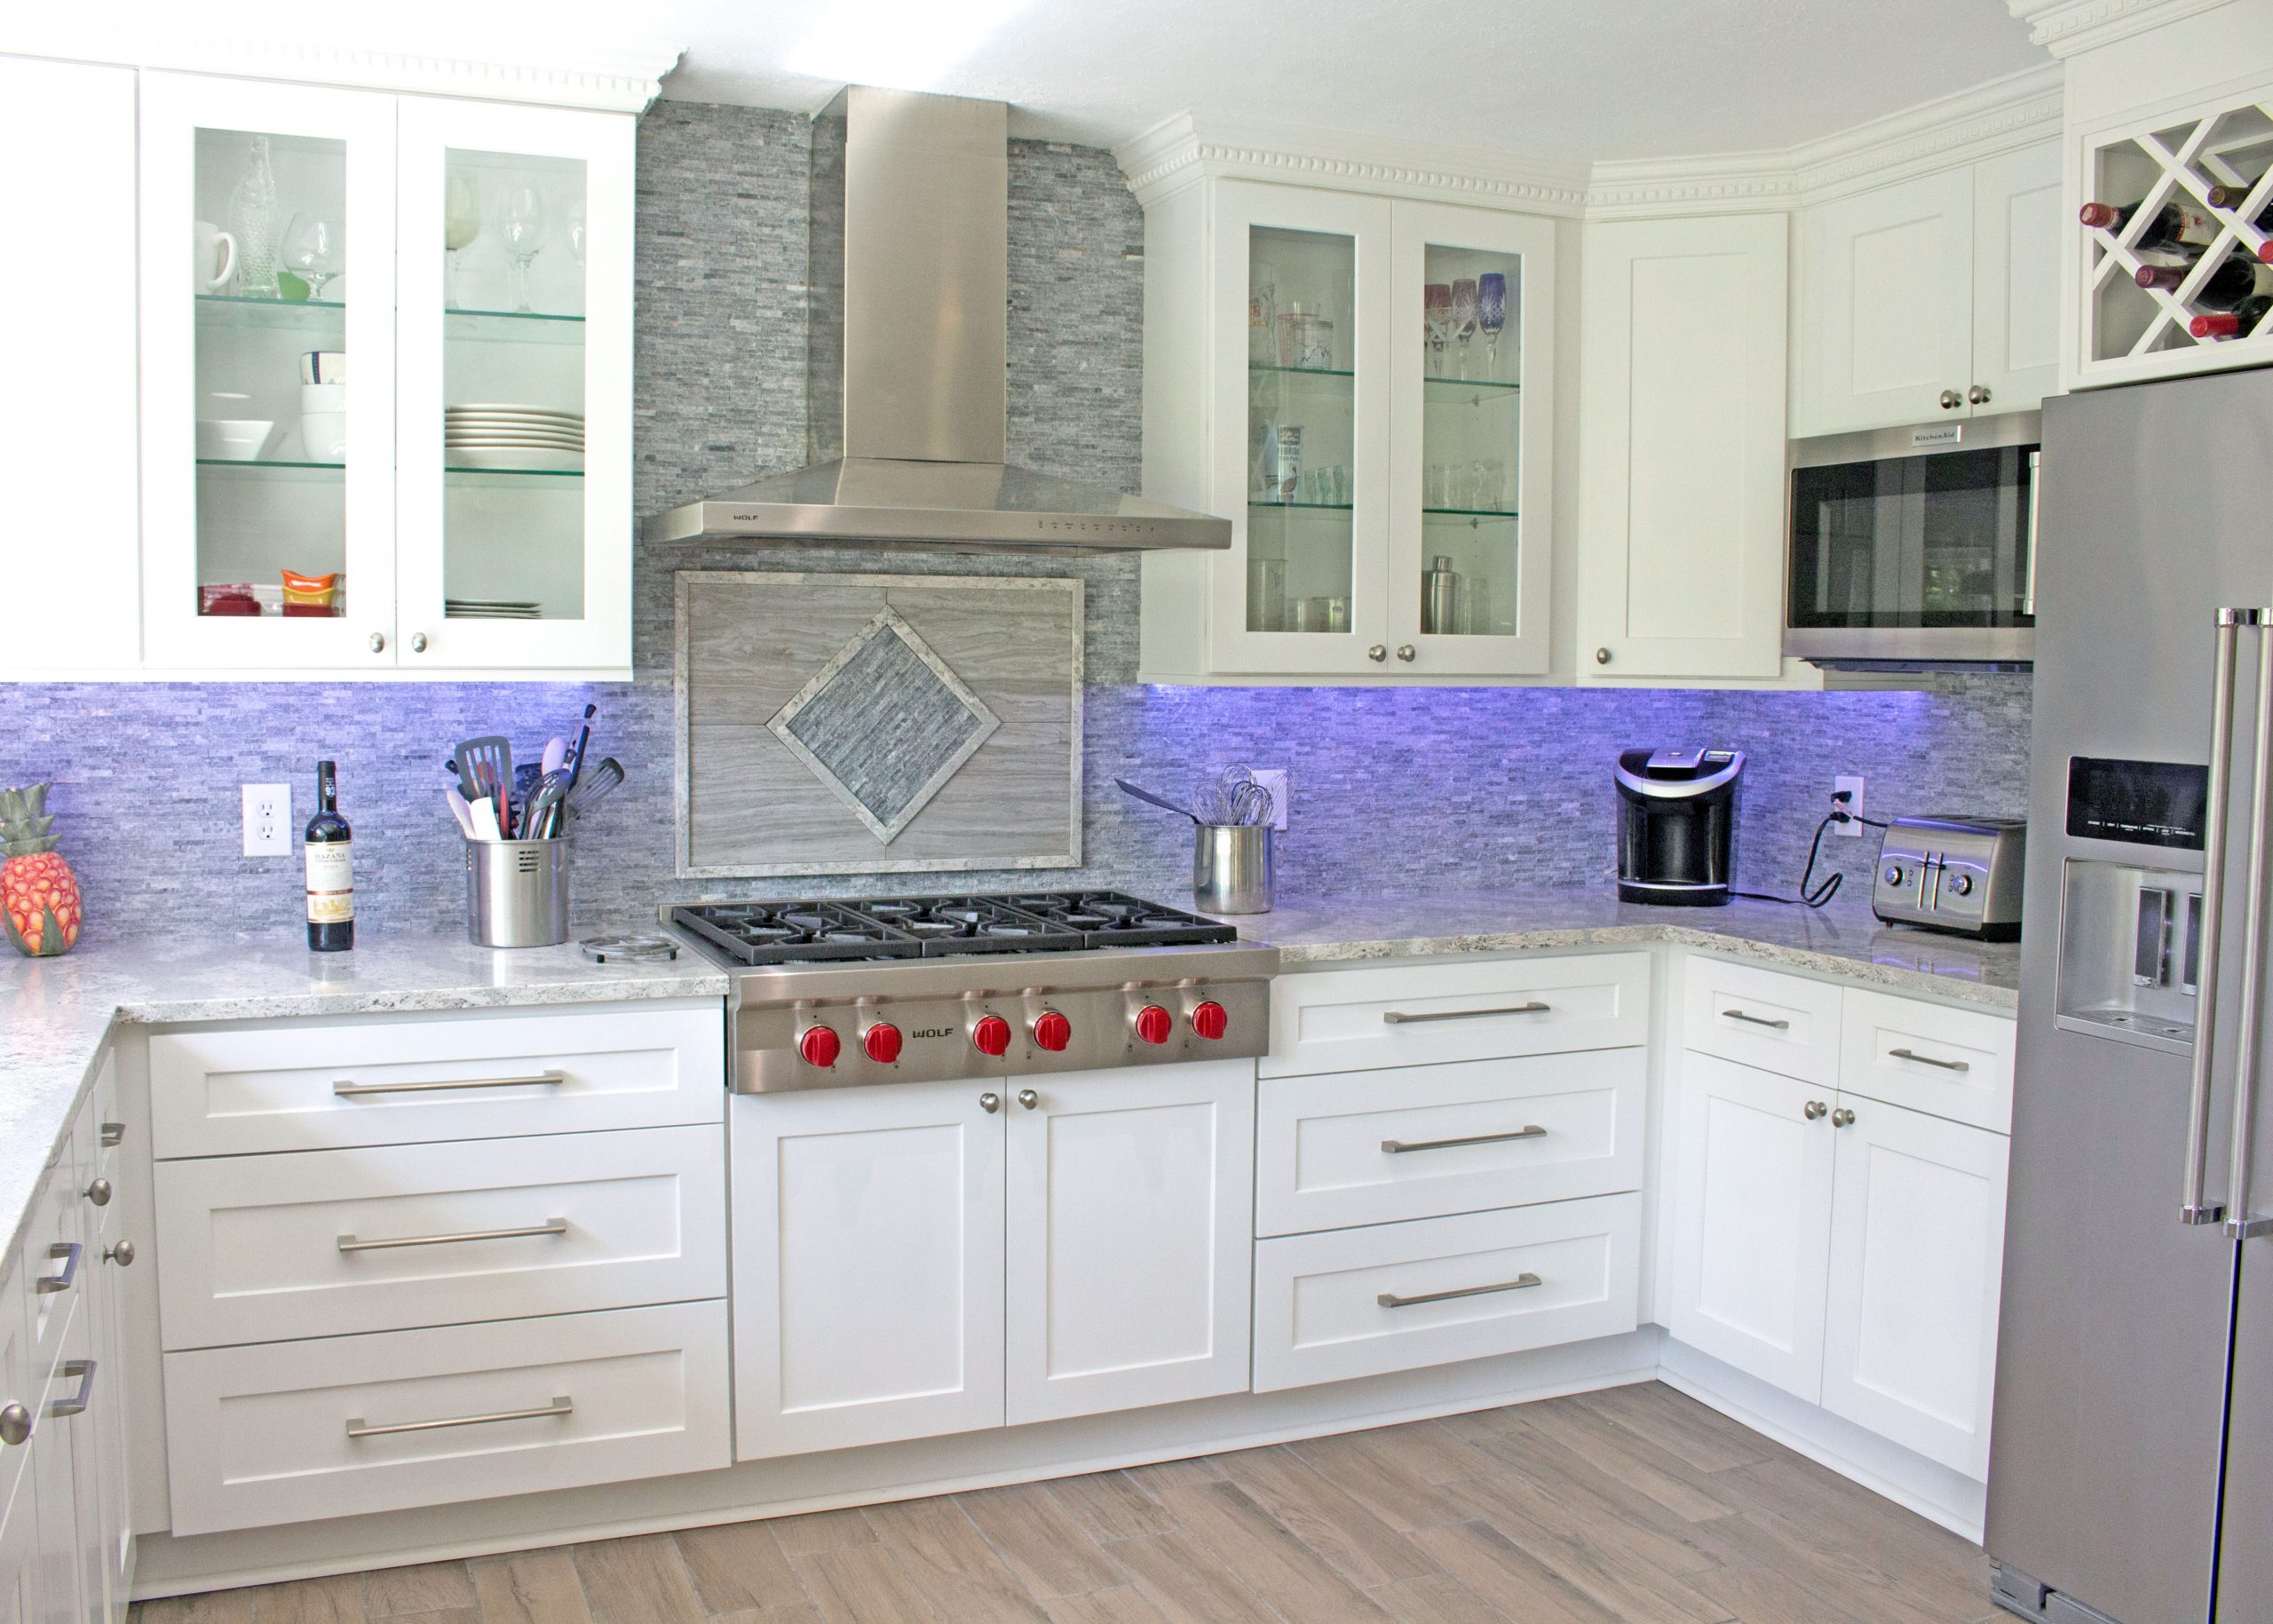 Shows Custom Lighting in the Kitchen